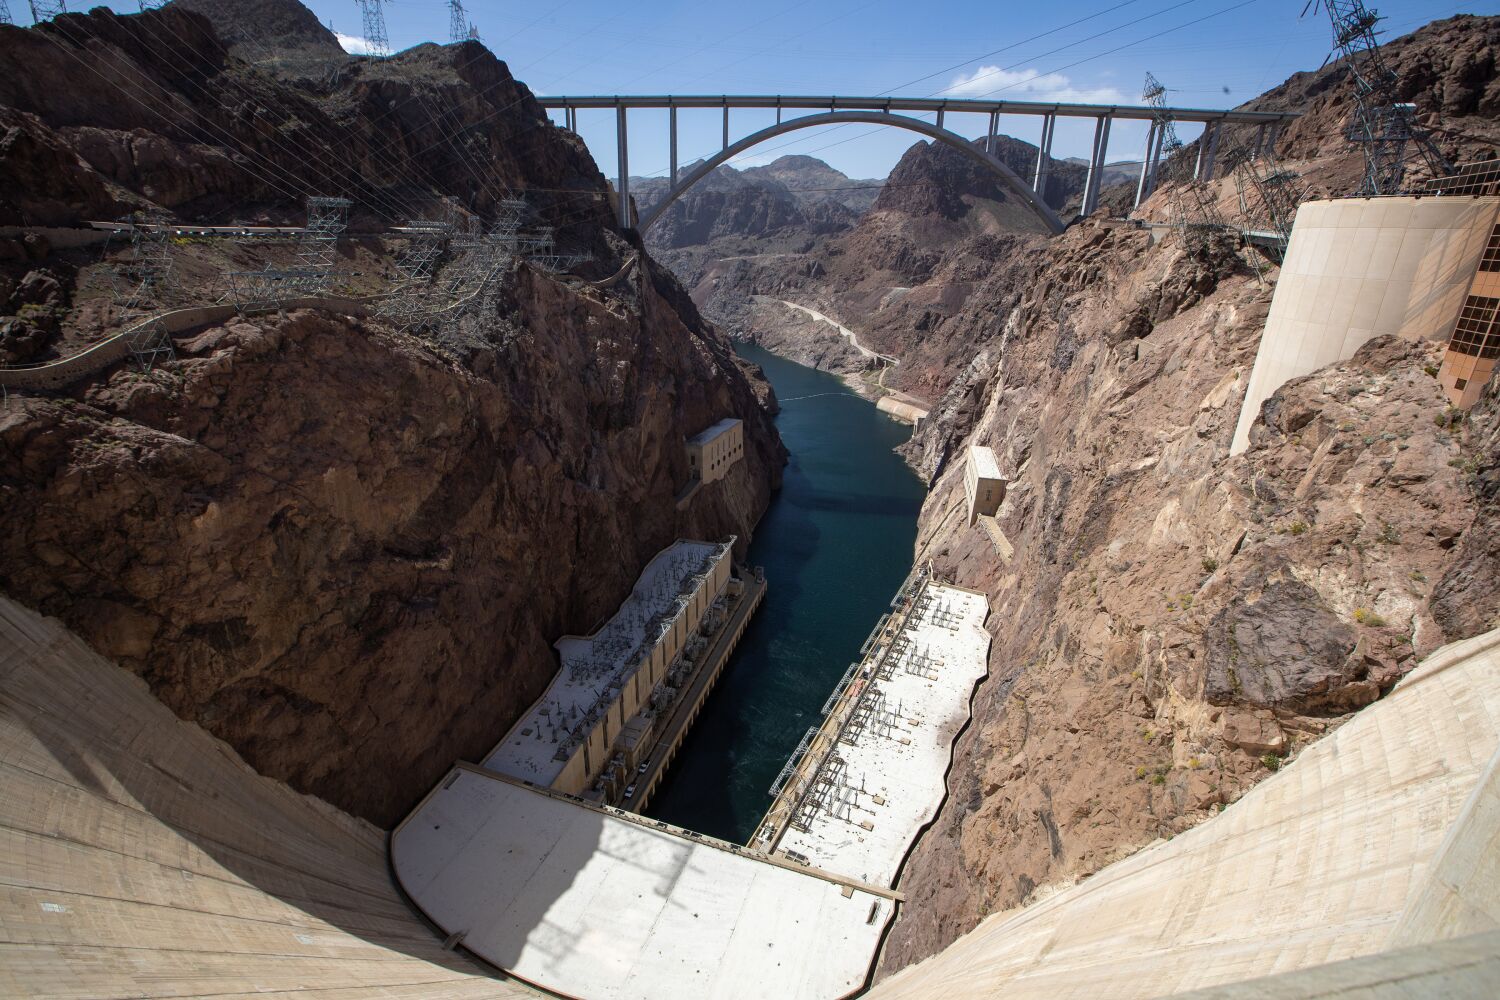 Drought-ravaged Colorado River gets relief from snow. But long-term water crisis remains